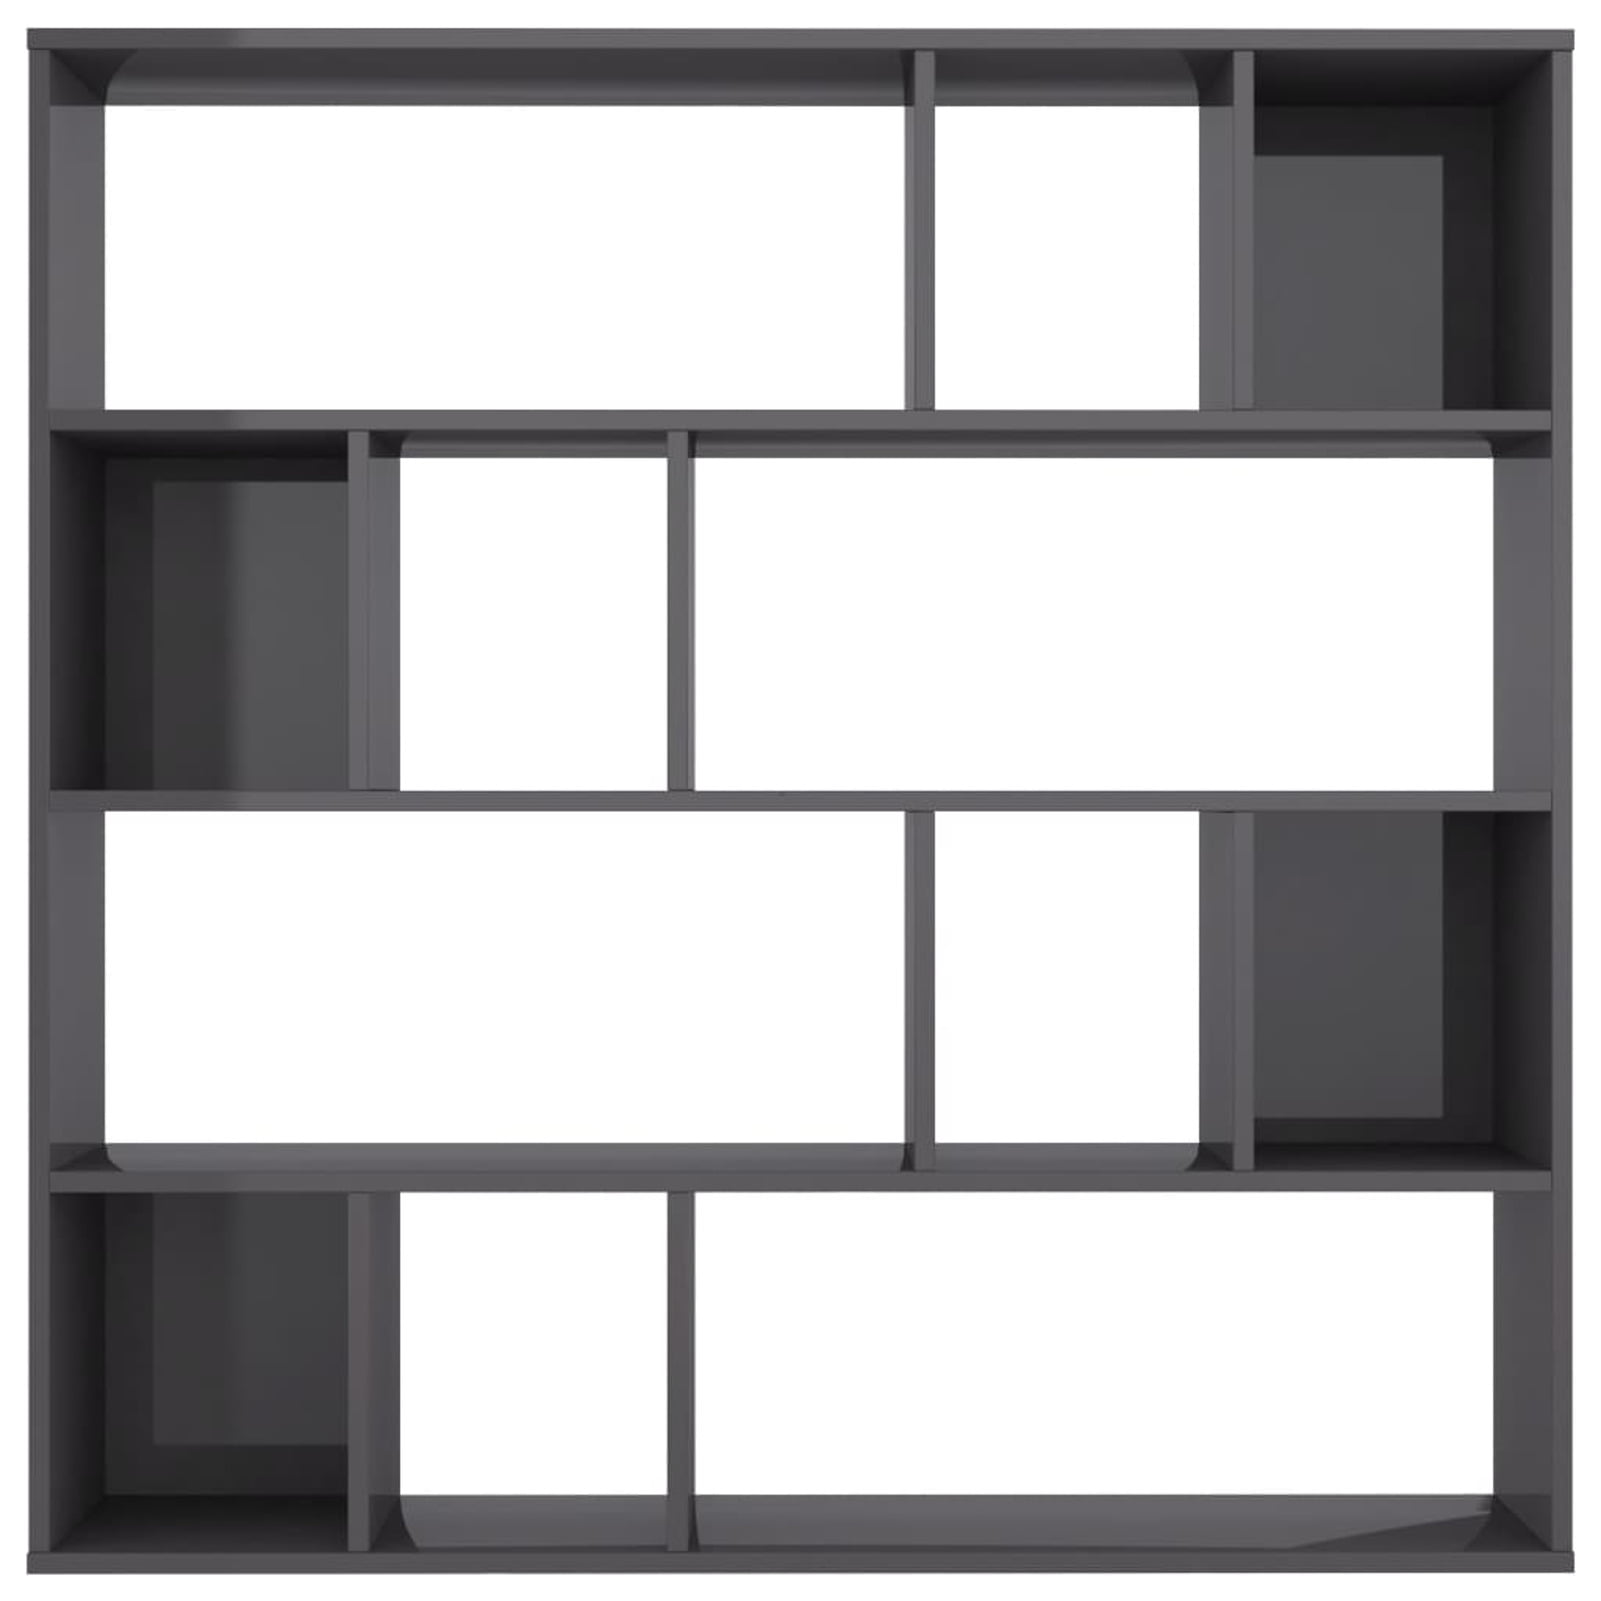 W x D x H Festnight 12 Compartments Bookcase Organizer Storage Shelves Collectables Display Cabinet Chipboard Room Divider for Living Room Home Furniture 43.3 x 9.4 x 43.3 Inches